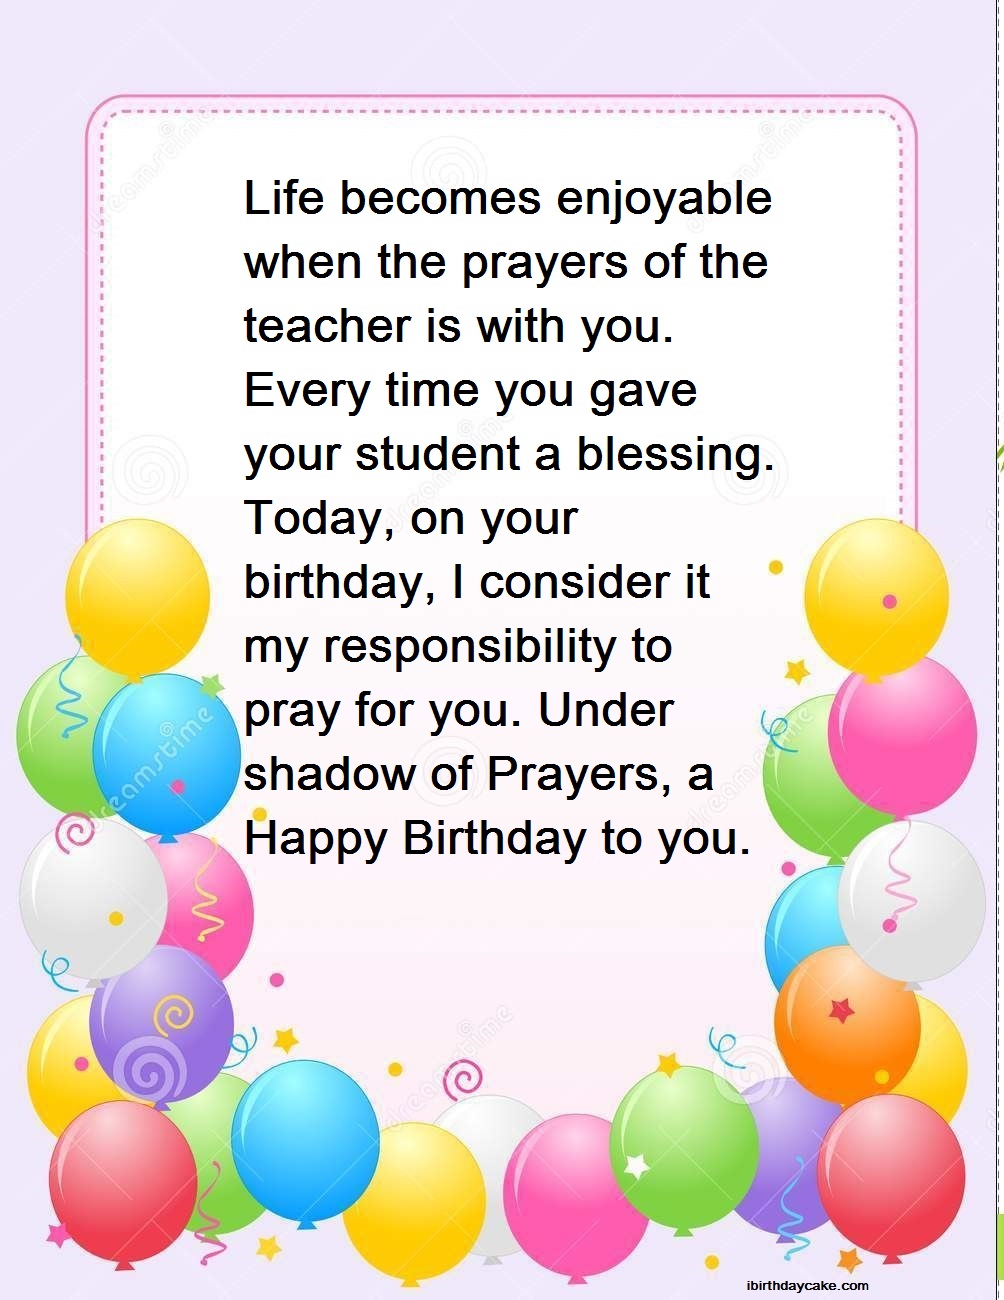 100-best-happy-birthday-wishes-to-teacher-2019-messages-quotes